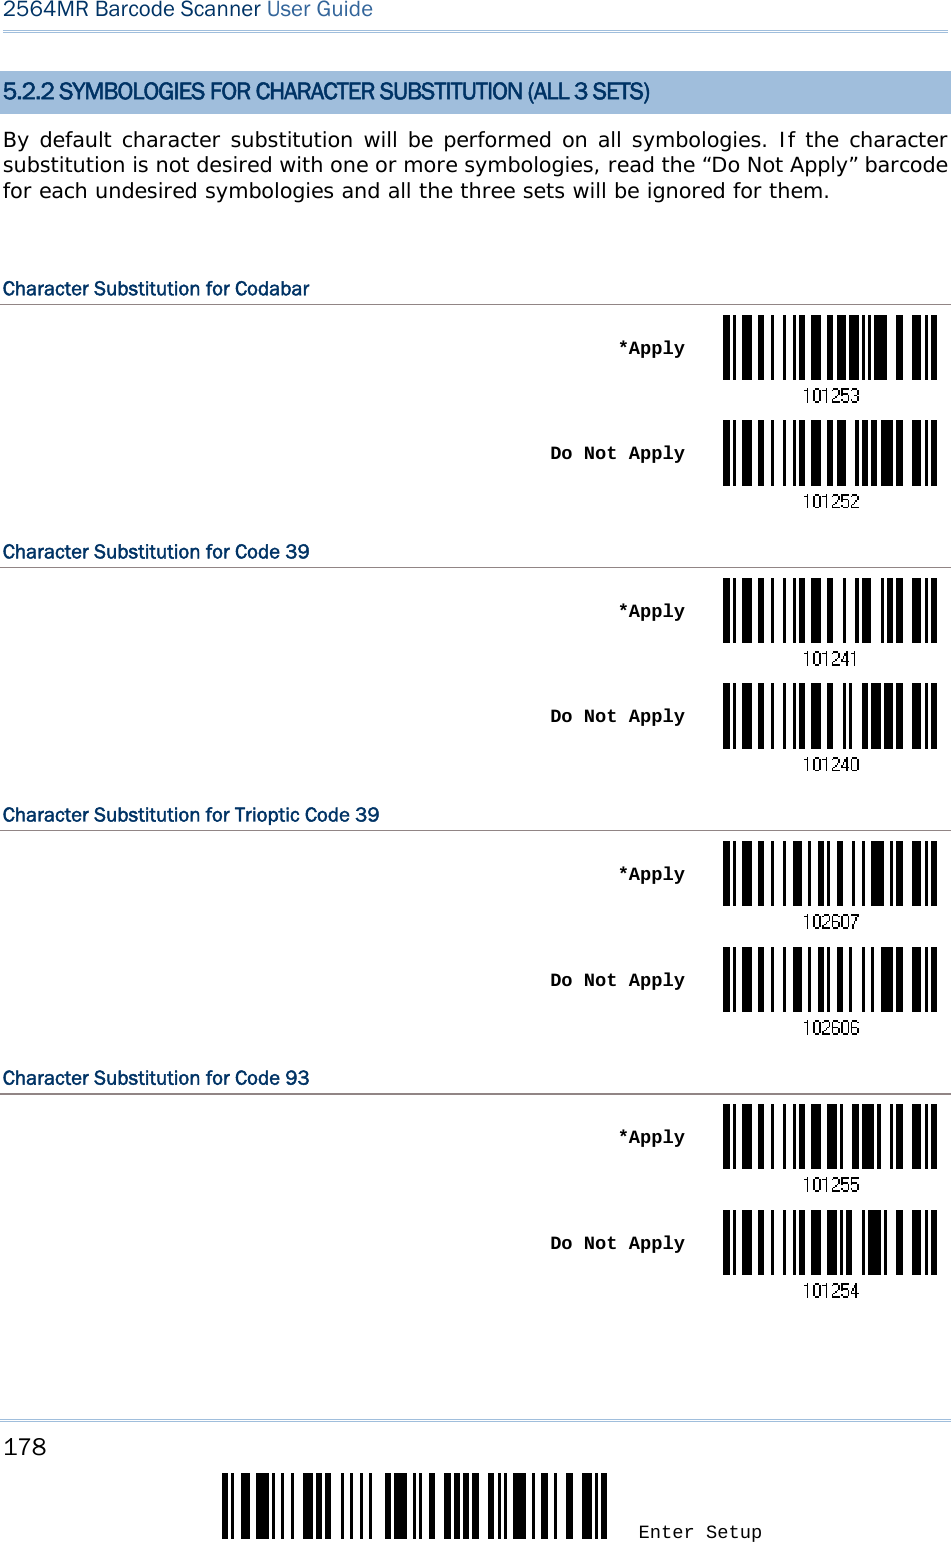 178 Enter Setup 2564MR Barcode Scanner User Guide  5.2.2 SYMBOLOGIES FOR CHARACTER SUBSTITUTION (ALL 3 SETS) By default character substitution will be performed on all symbologies. If the character substitution is not desired with one or more symbologies, read the “Do Not Apply” barcode for each undesired symbologies and all the three sets will be ignored for them.  Character Substitution for Codabar  *Apply Do Not ApplyCharacter Substitution for Code 39  *Apply Do Not ApplyCharacter Substitution for Trioptic Code 39  *Apply Do Not ApplyCharacter Substitution for Code 93  *Apply Do Not Apply   